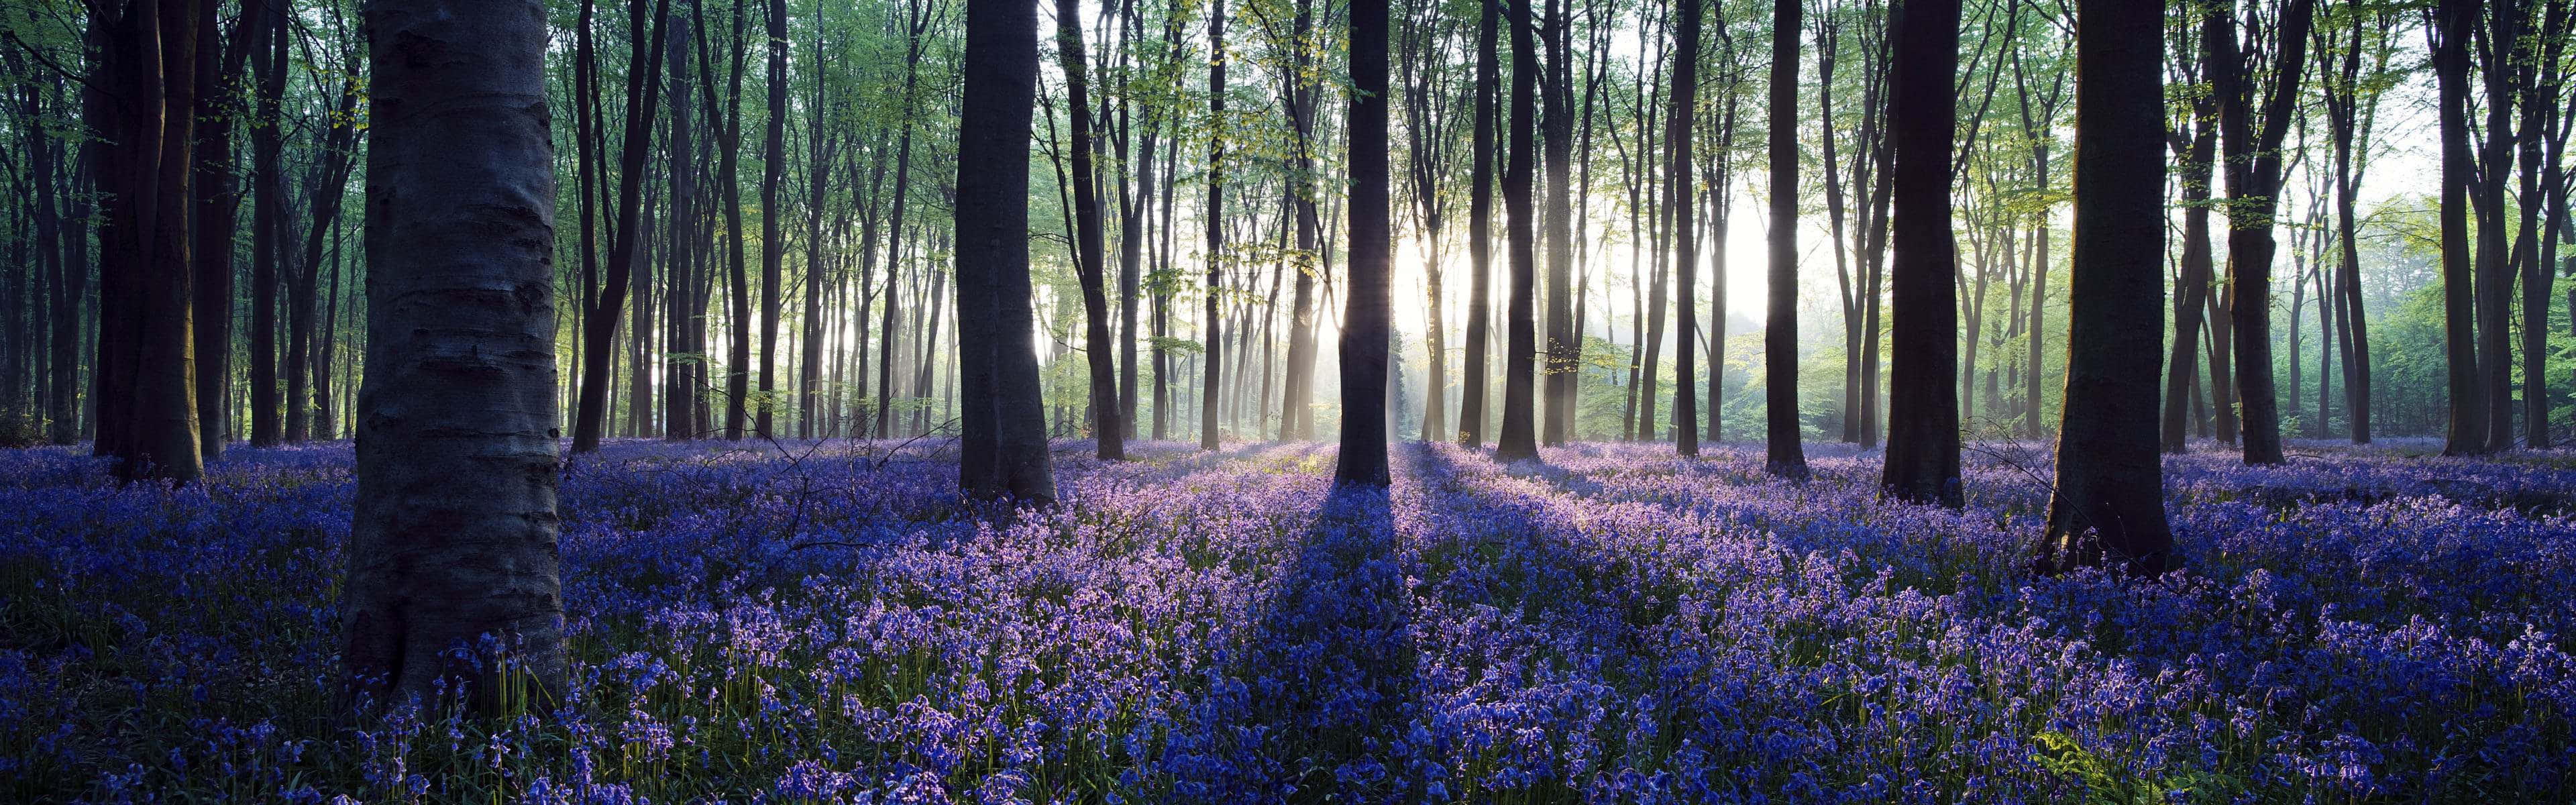 Bluebells In The Forest As A Panoramic Desktop Background